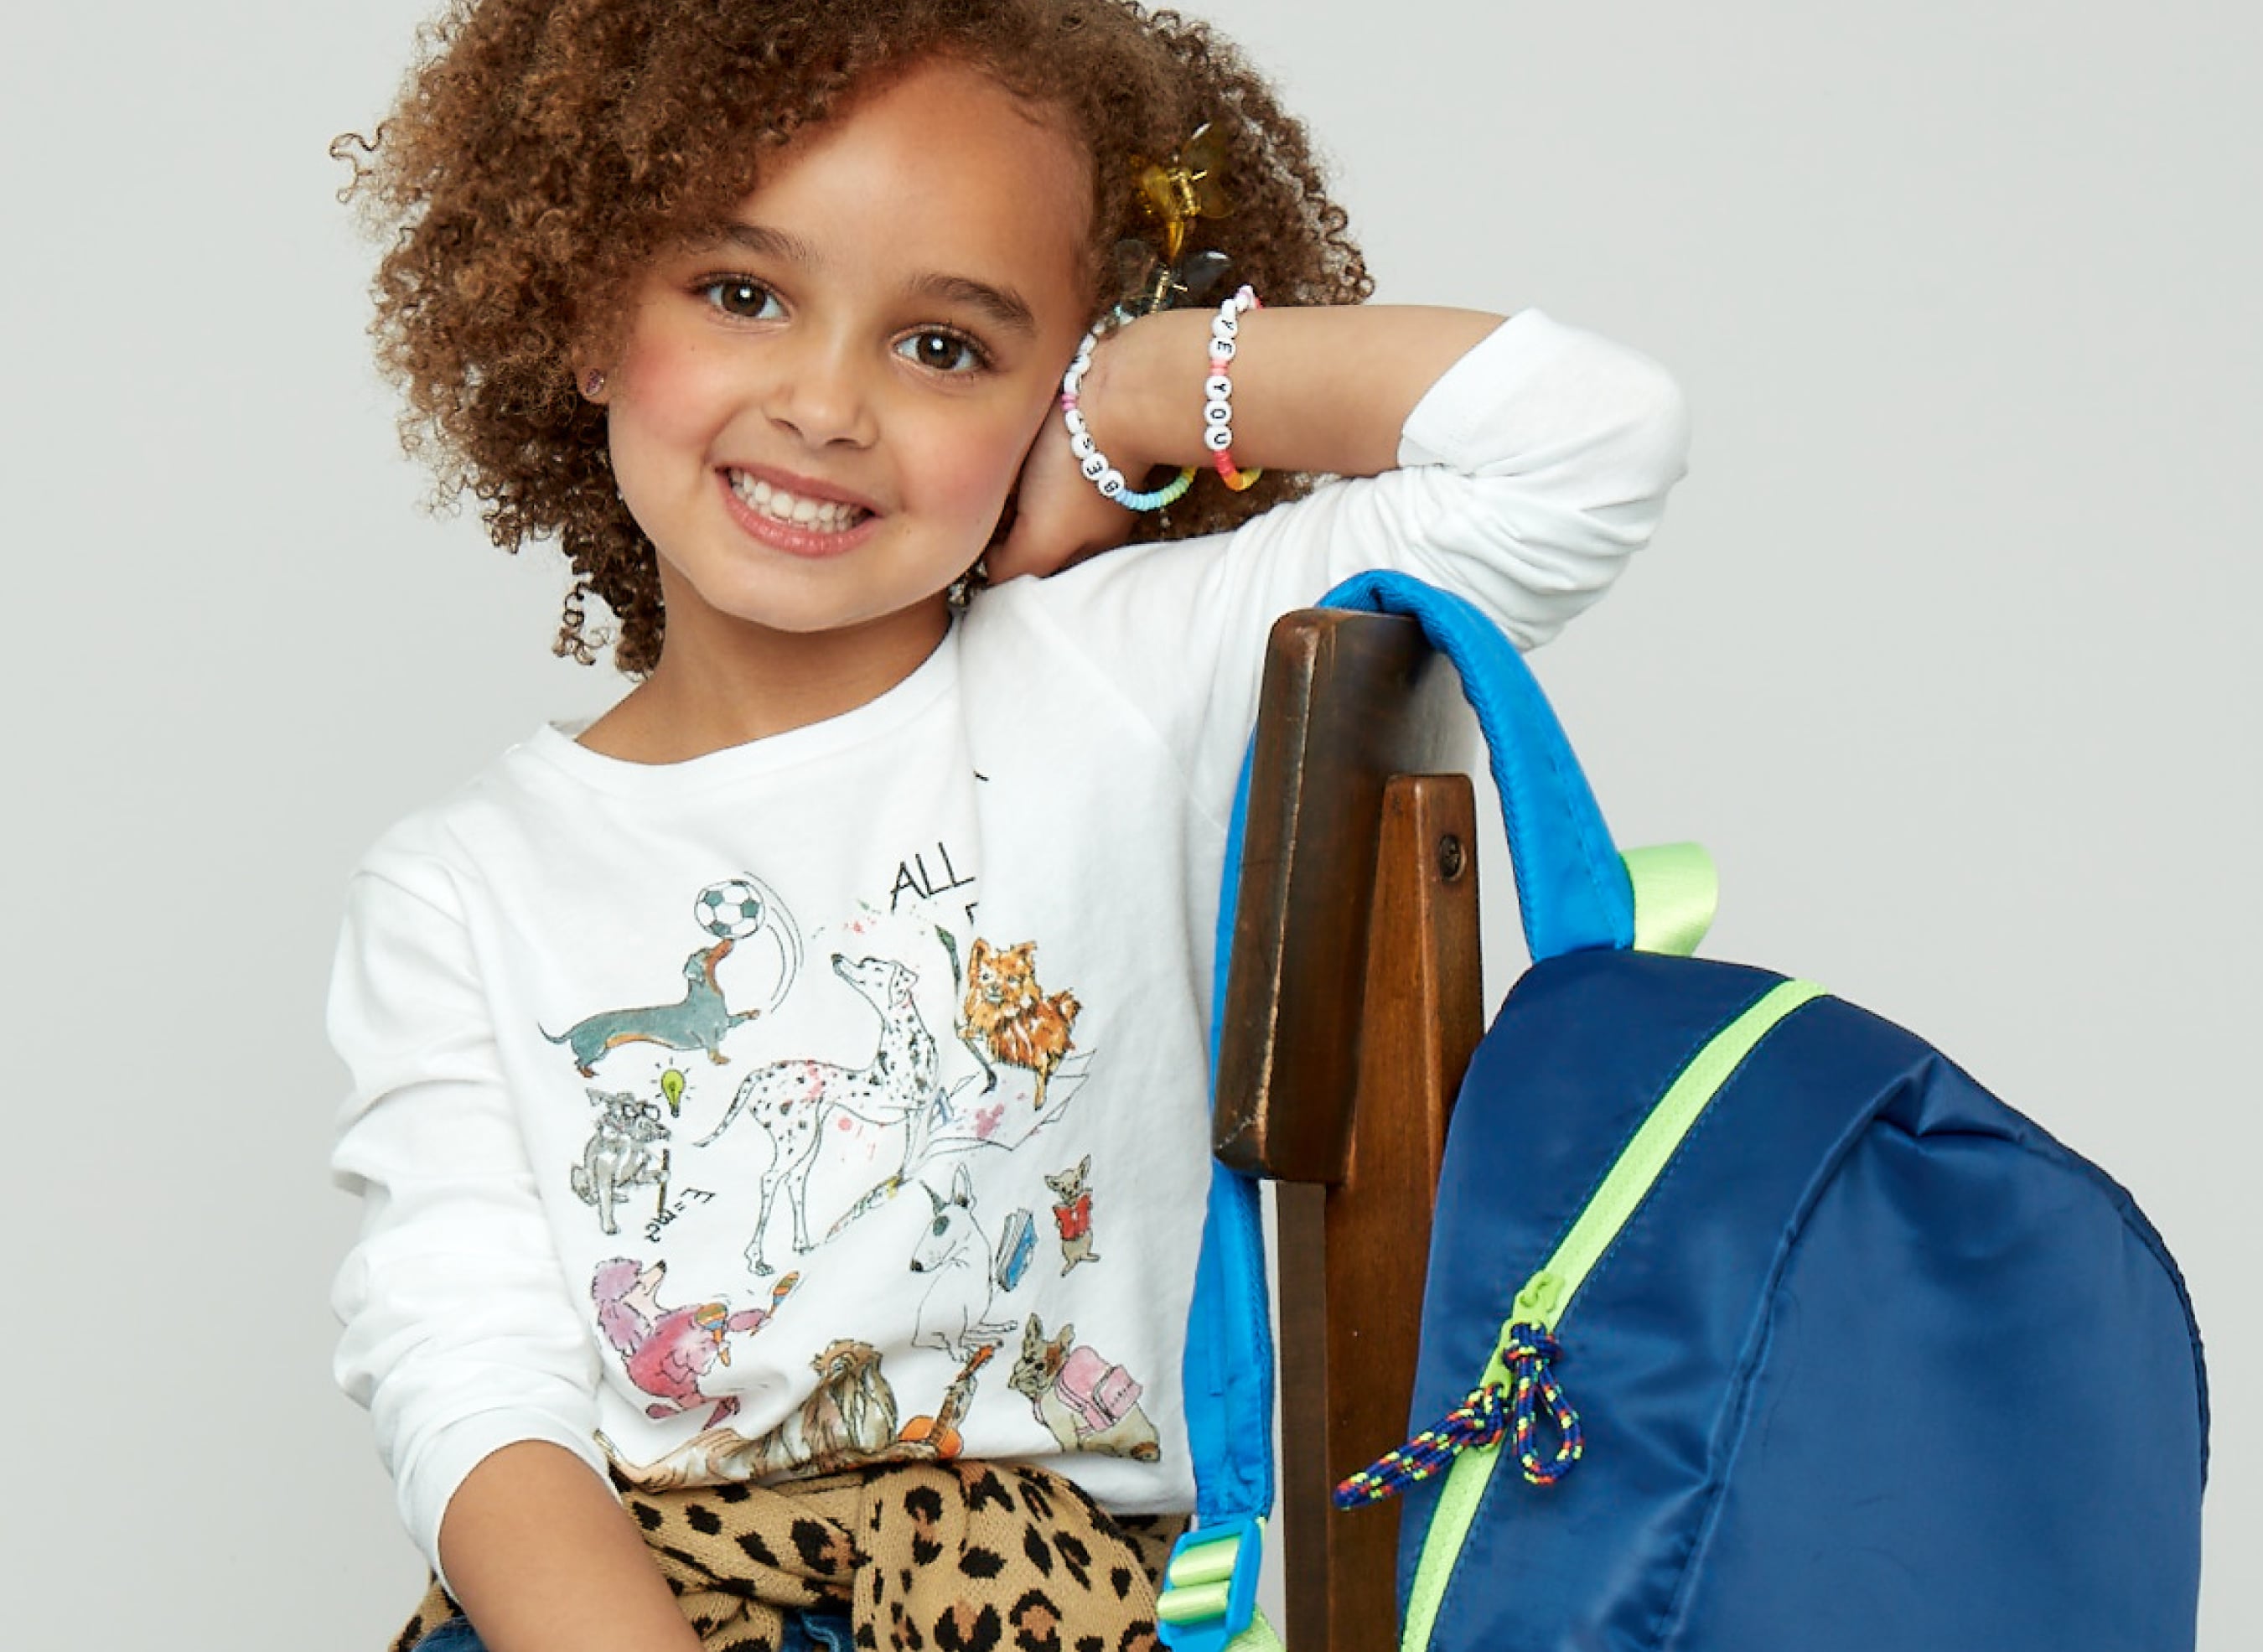 Kick-off back-to-school with the best deals of the season during TangerStyle Spring!